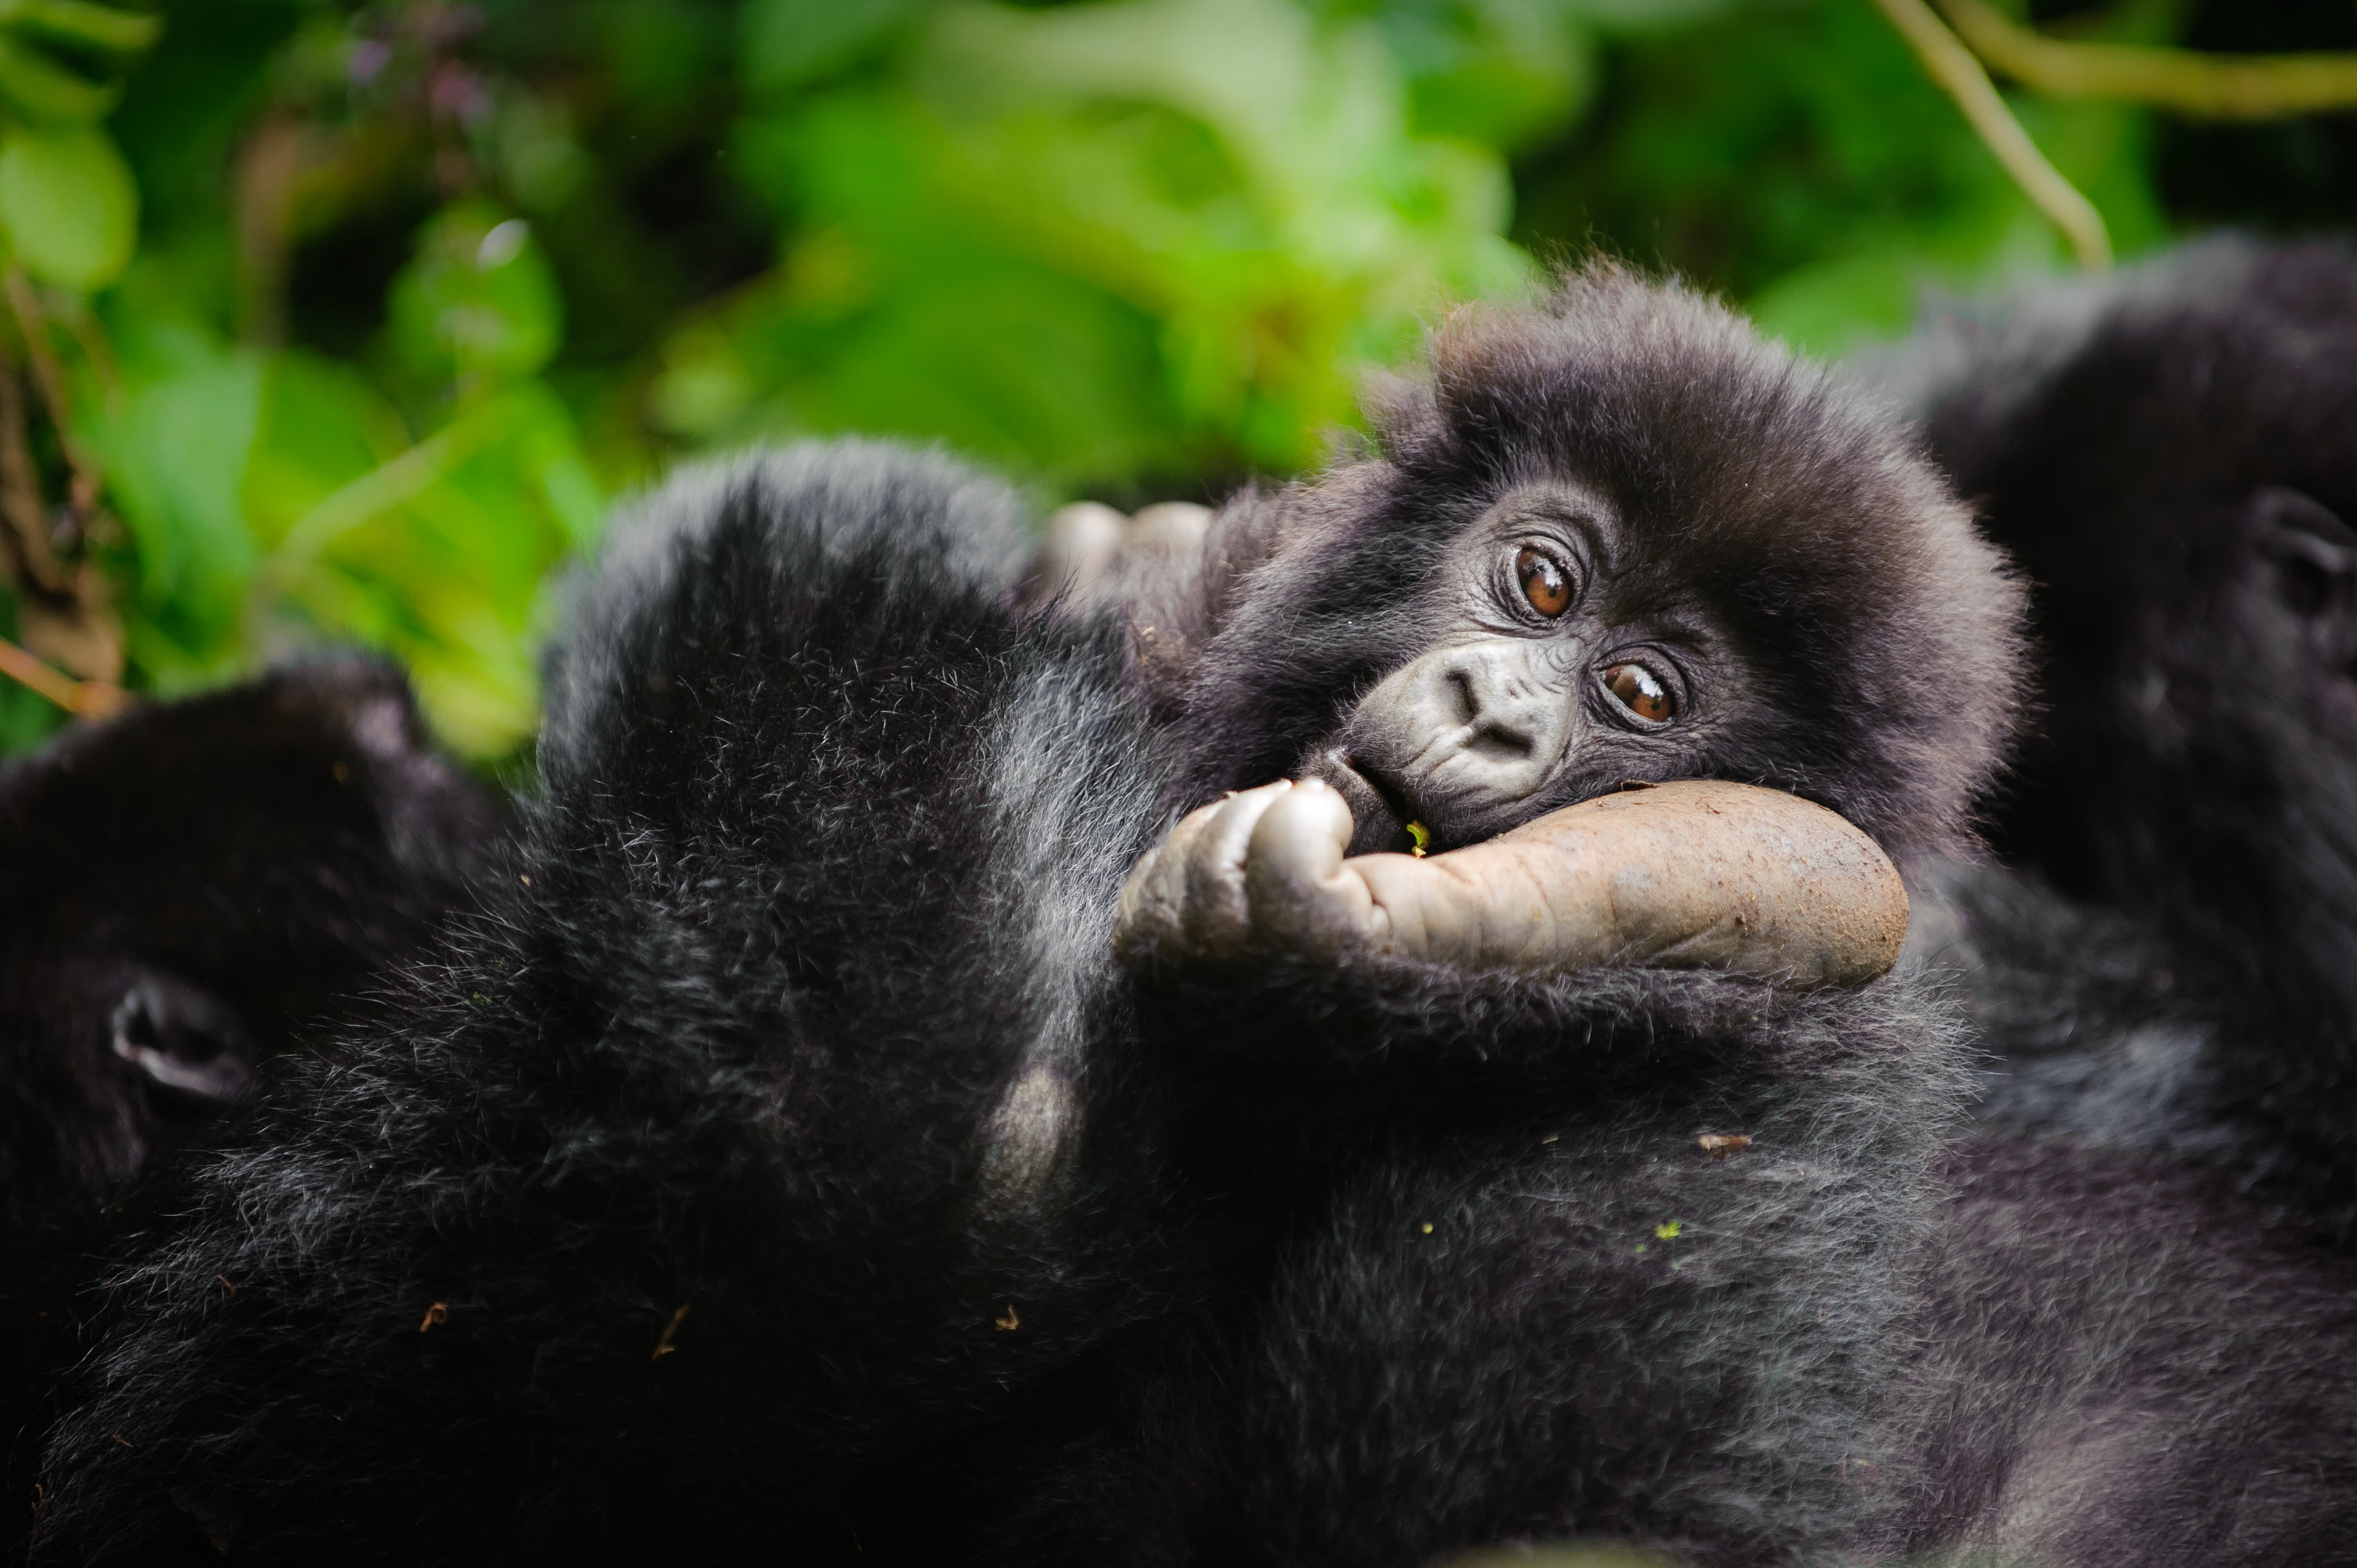 This is one of the few places in the world to see gorillas in the wild